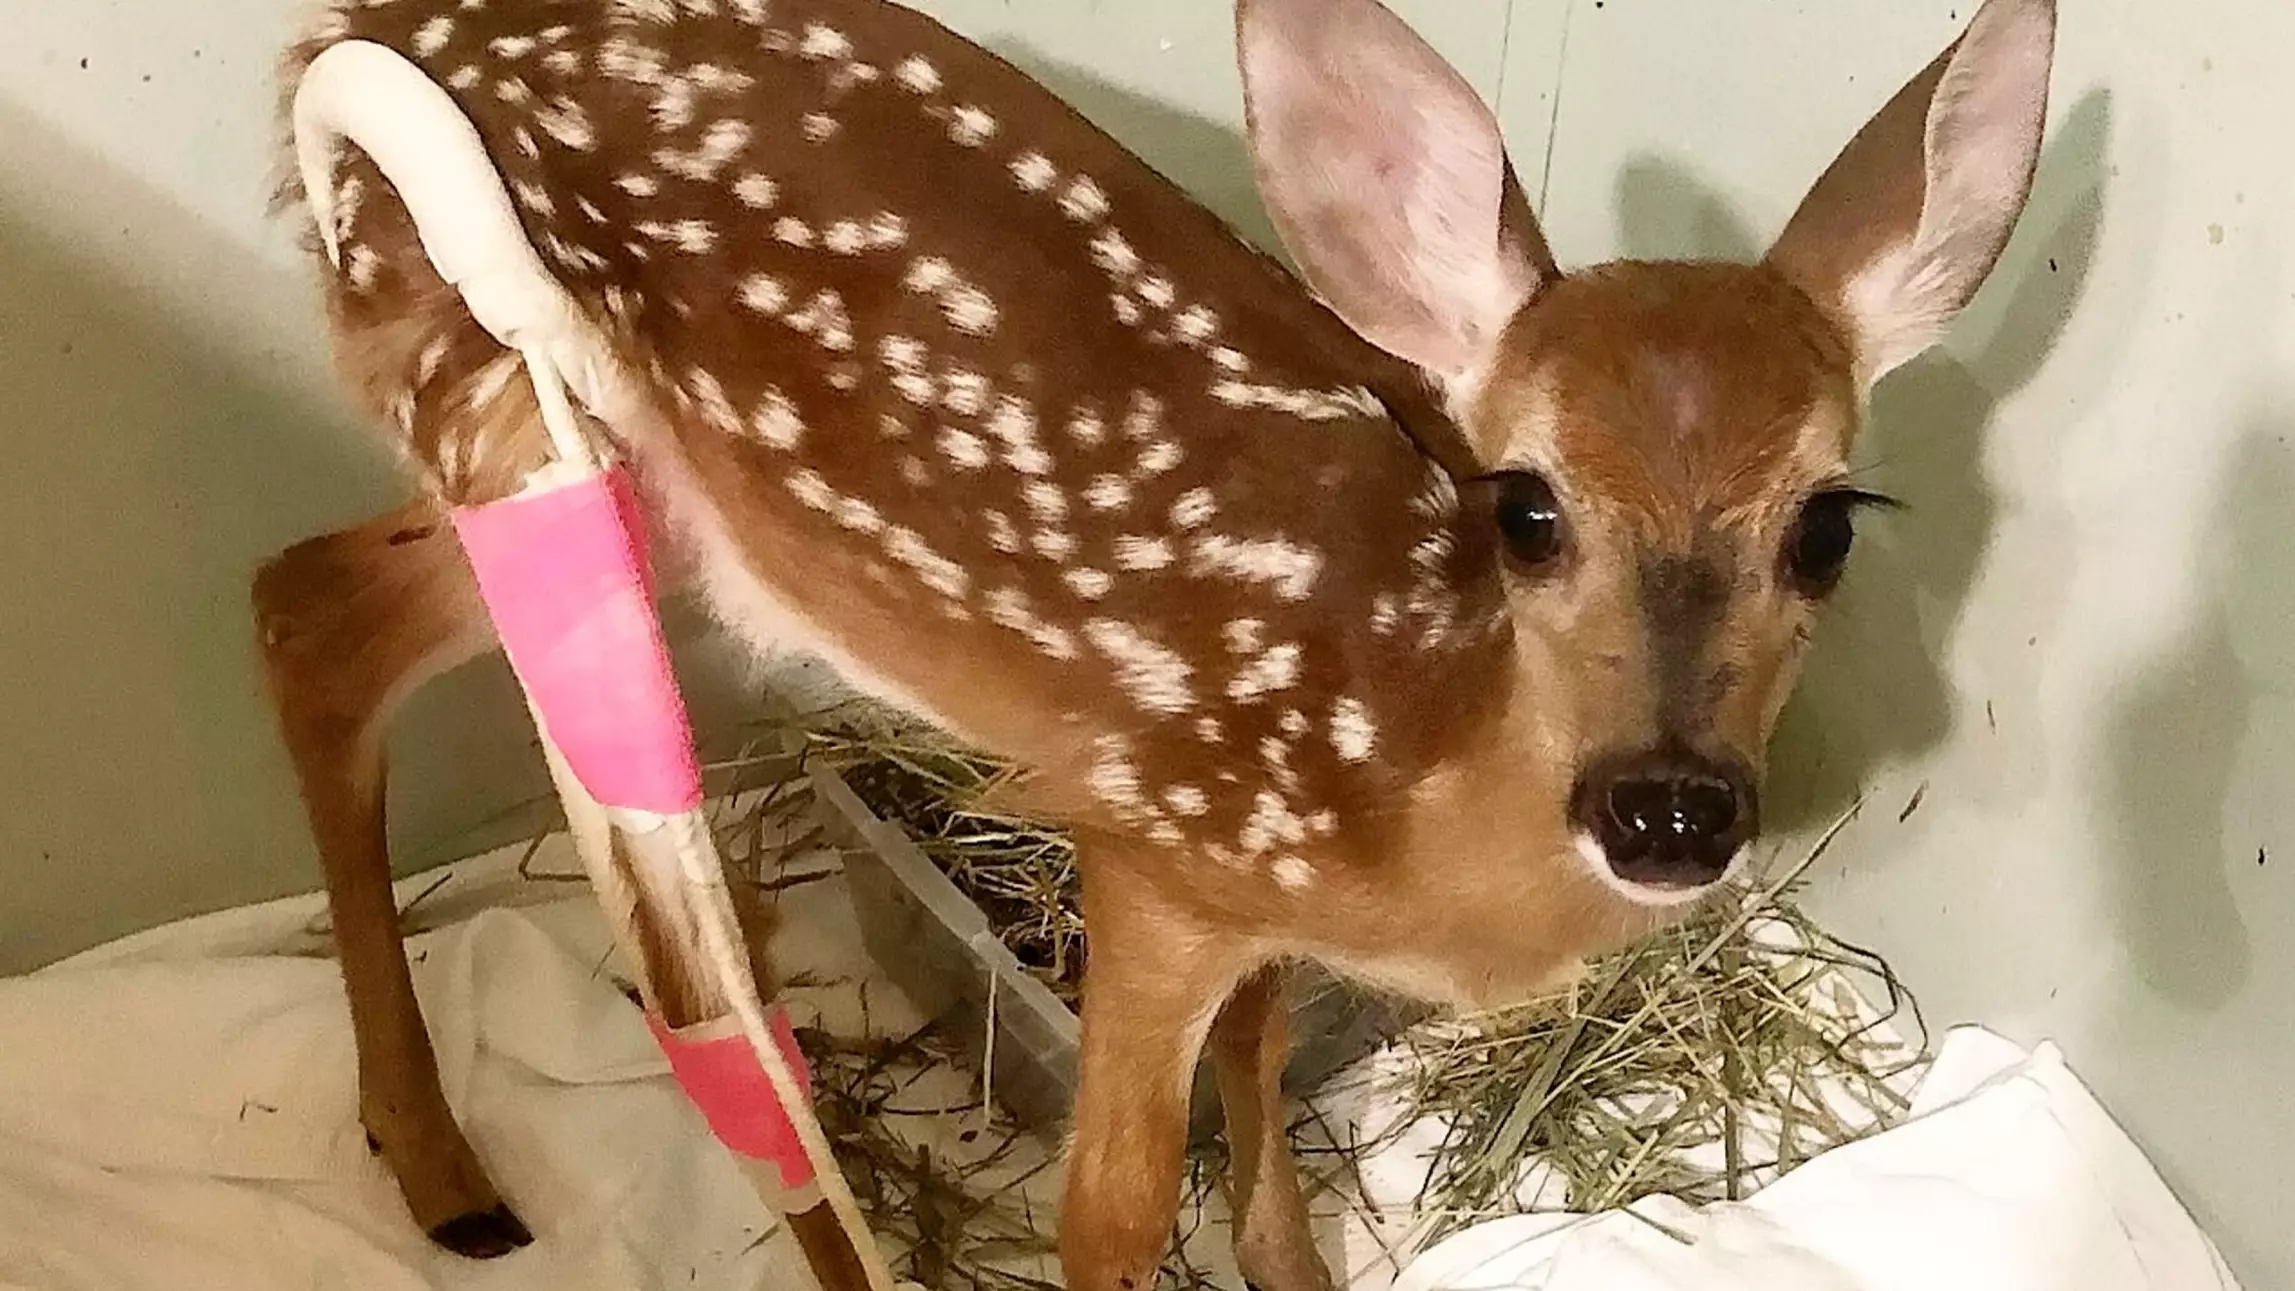 Adorable Baby Deer Sports Bright Pink Cast After Breaking Leg